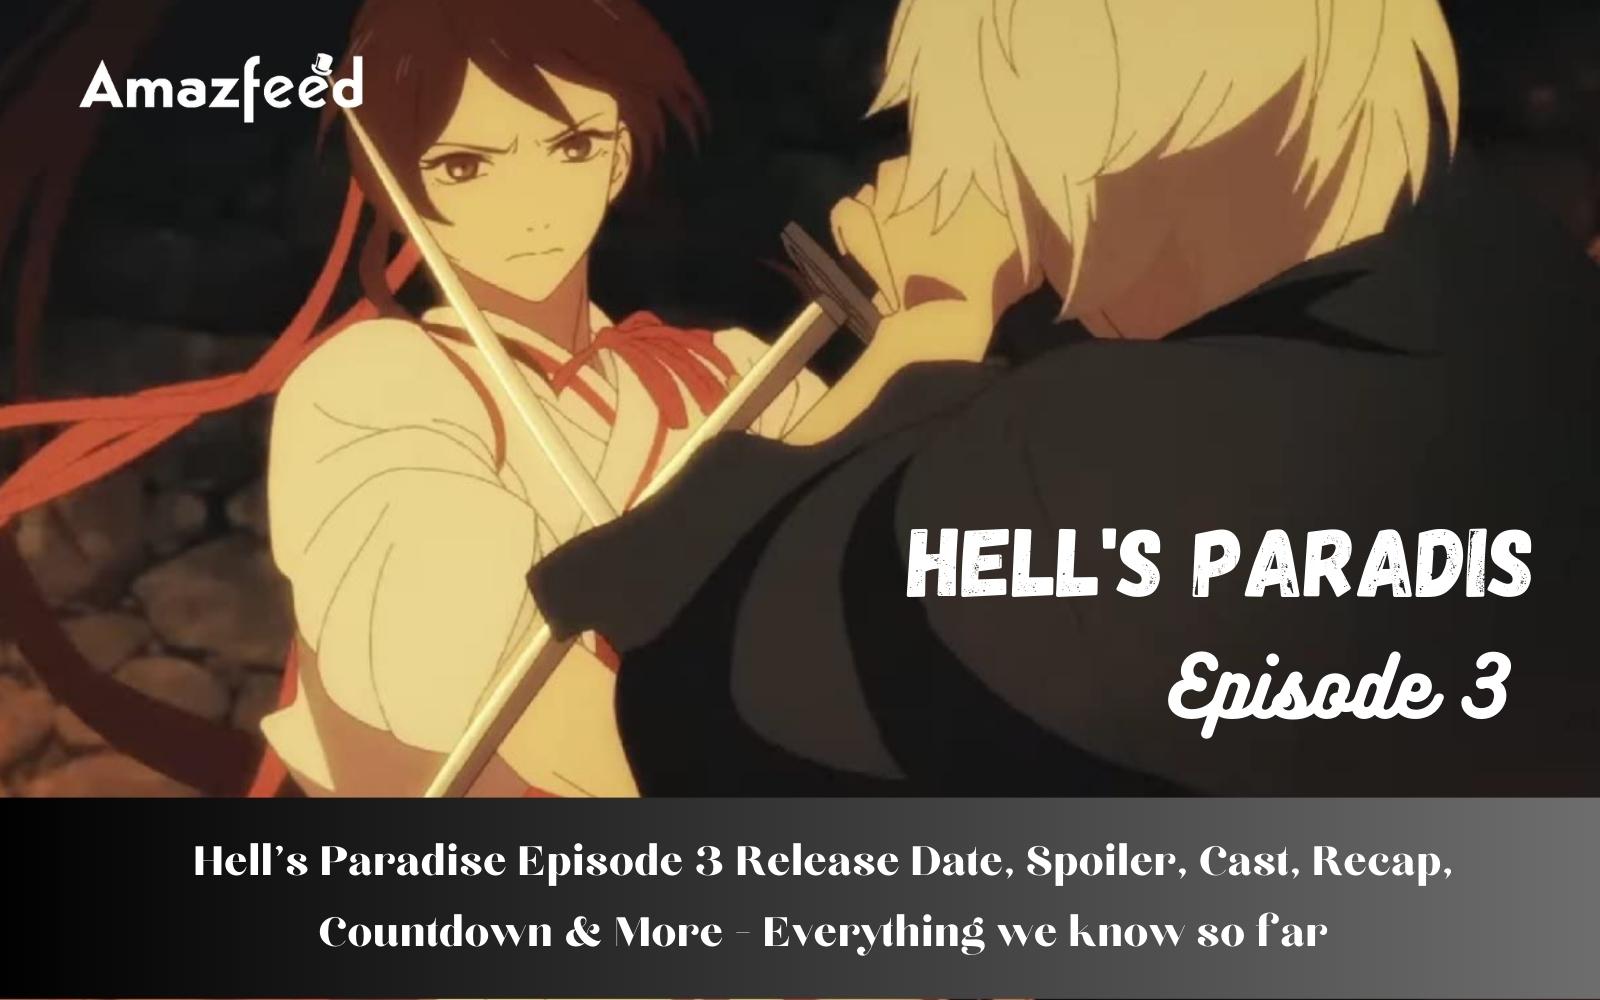 Manga Thrill on X: In episode 3 of Hell's Paradise: Jigokuraku, fans can  expect even more action and suspense as the story continues to unfold, and  a preview gives the first look